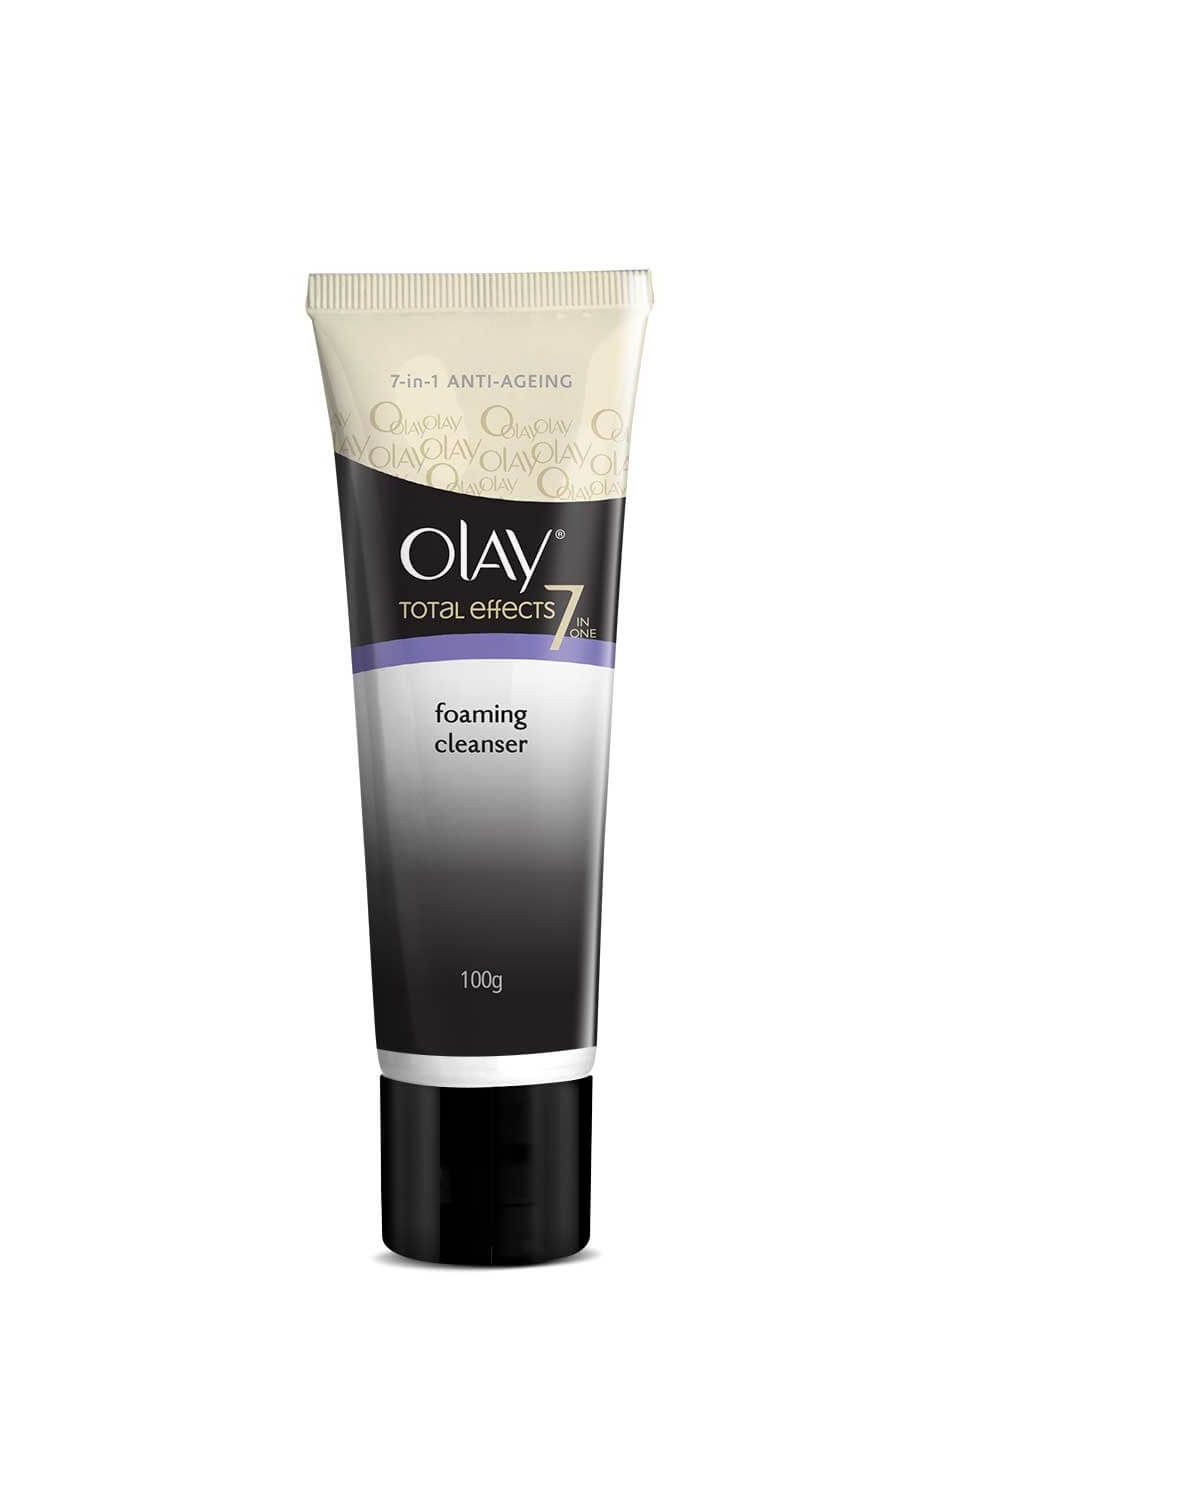 Olay Total Effects 7 in One Foaming Cleanser 100g